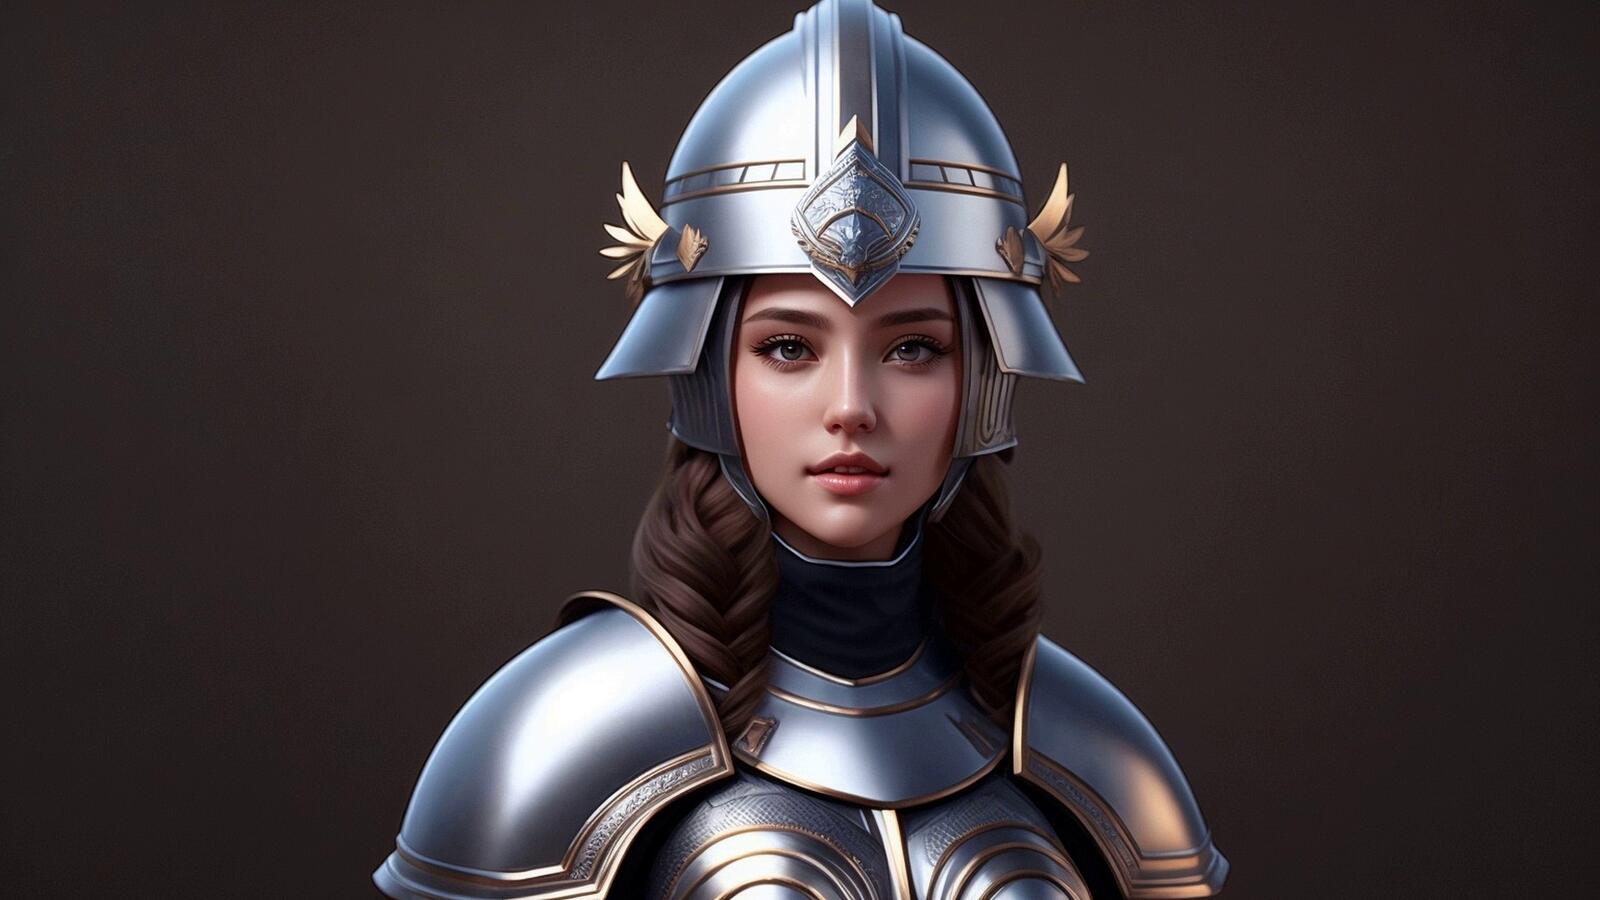 Free photo Girl warrior in armor on a coffee background